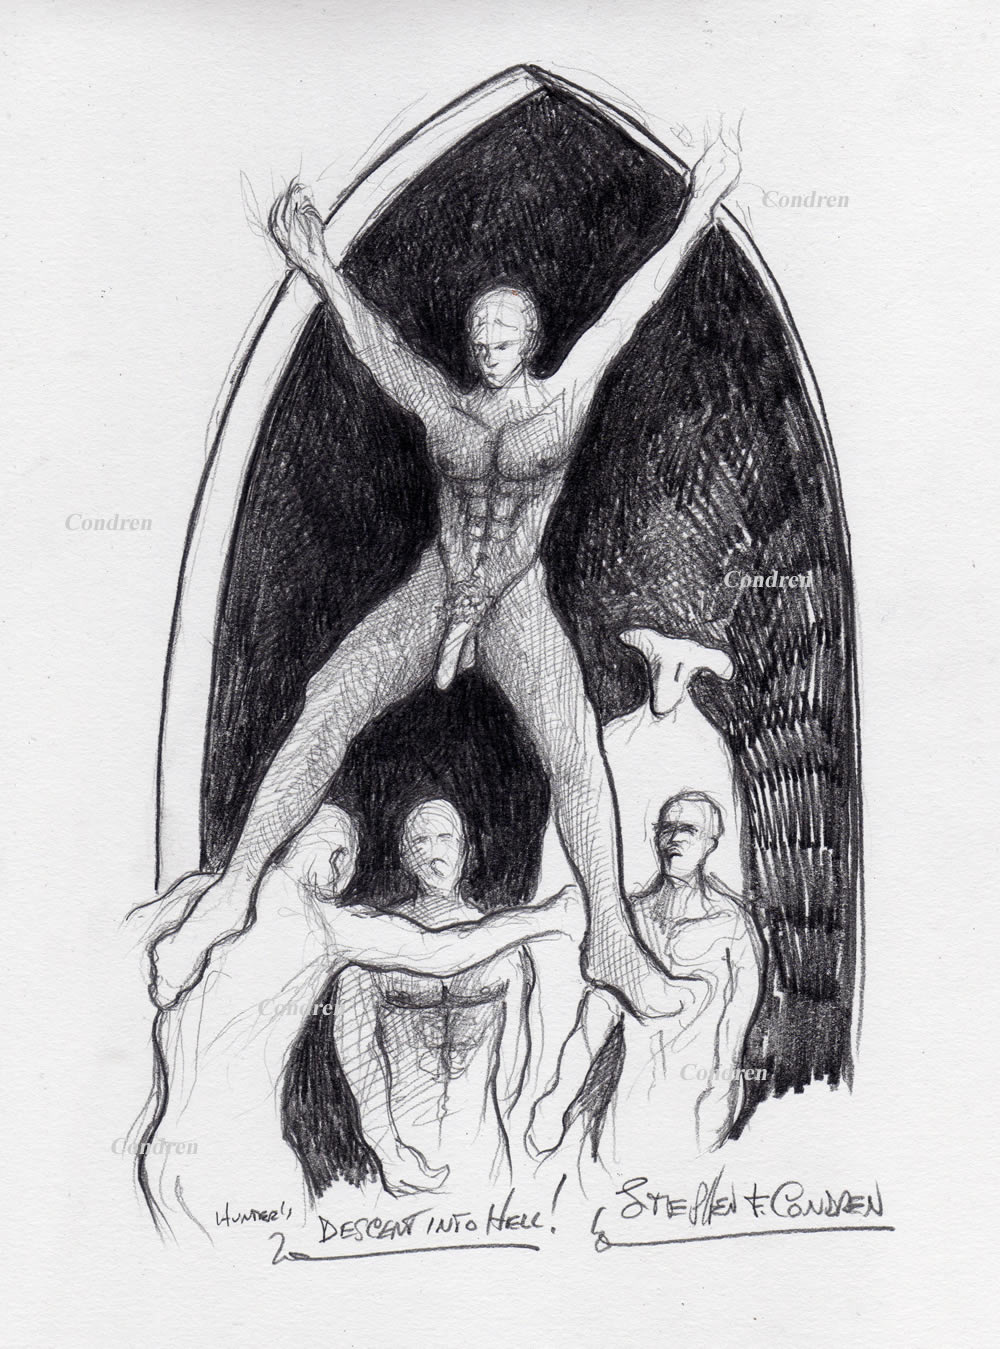 Descent into Hell! #596Z, or Damnation, a drawing of gay naked men cast down into Hell with Satan watching, by artist Stephen F. Condren of Condren Galleries, offering prints & scans.